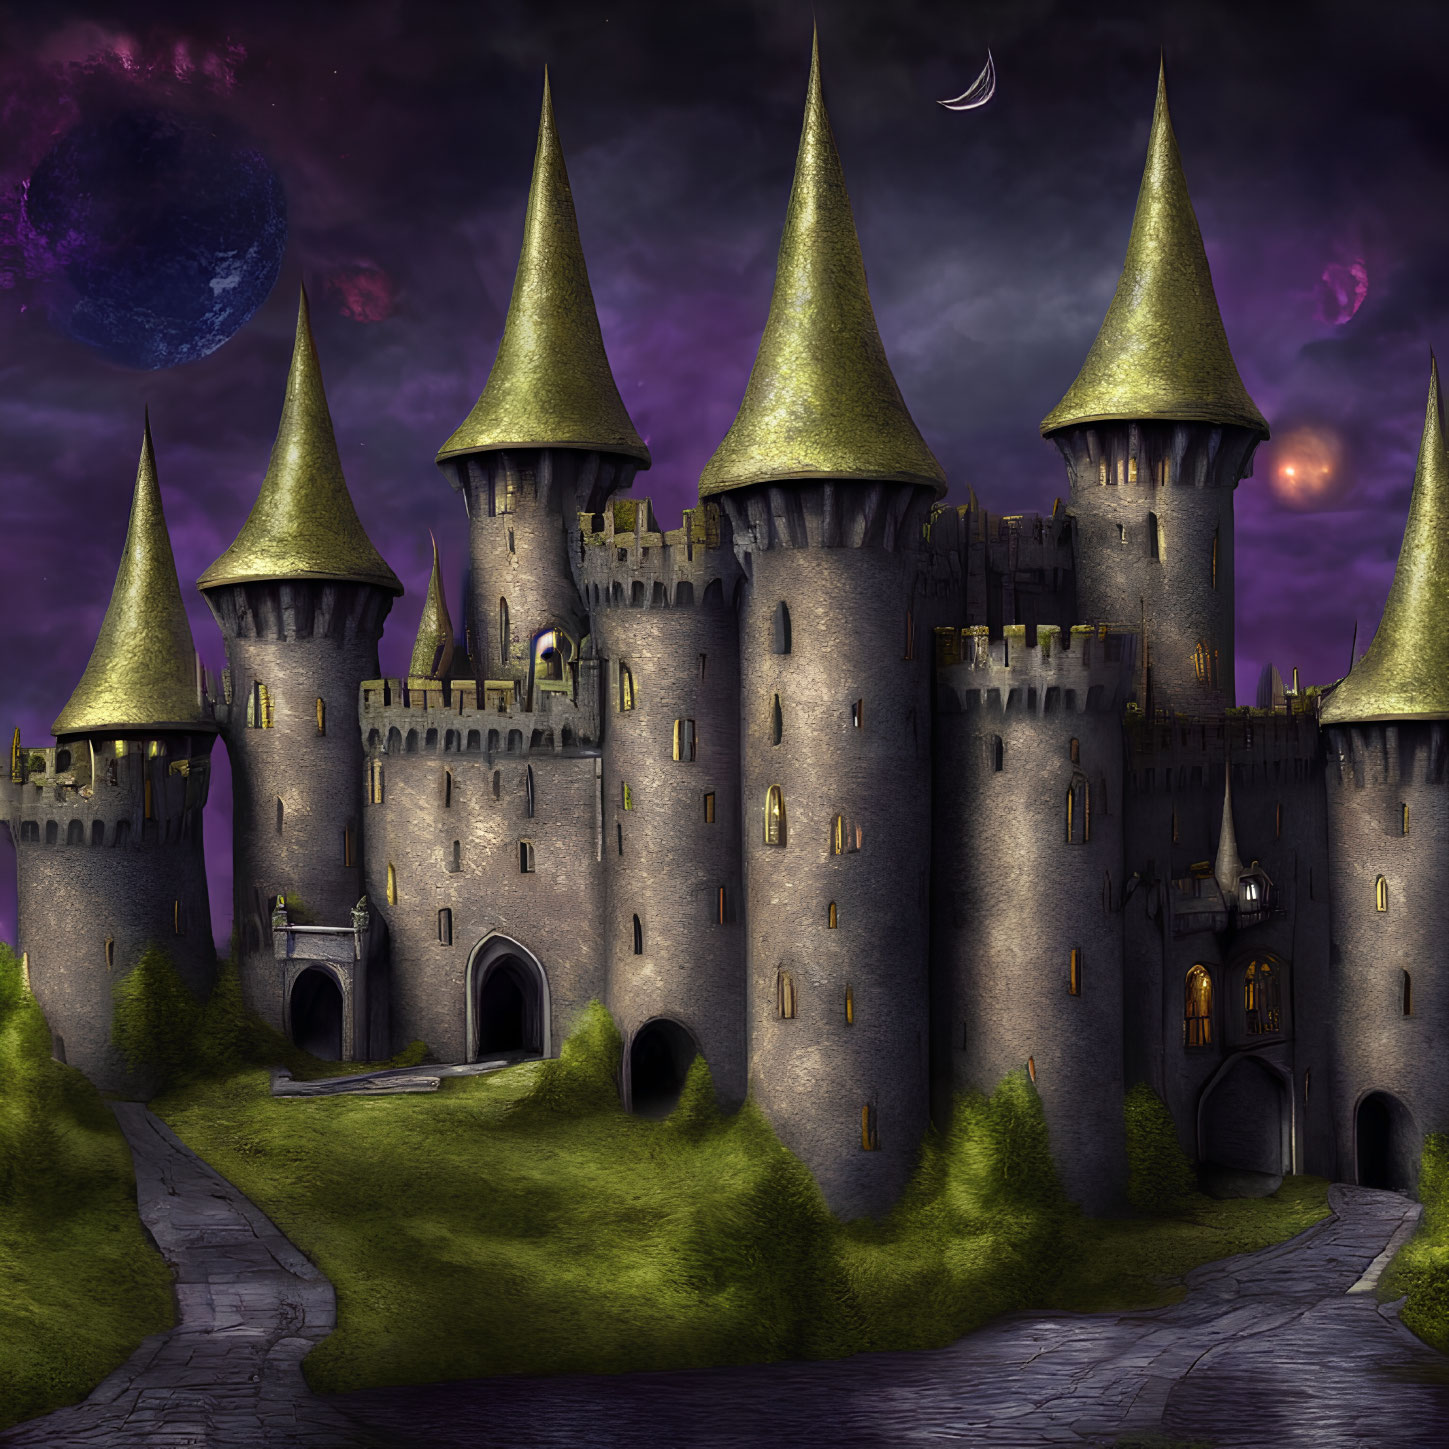 Medieval castle at night with illuminated towers and purple sky